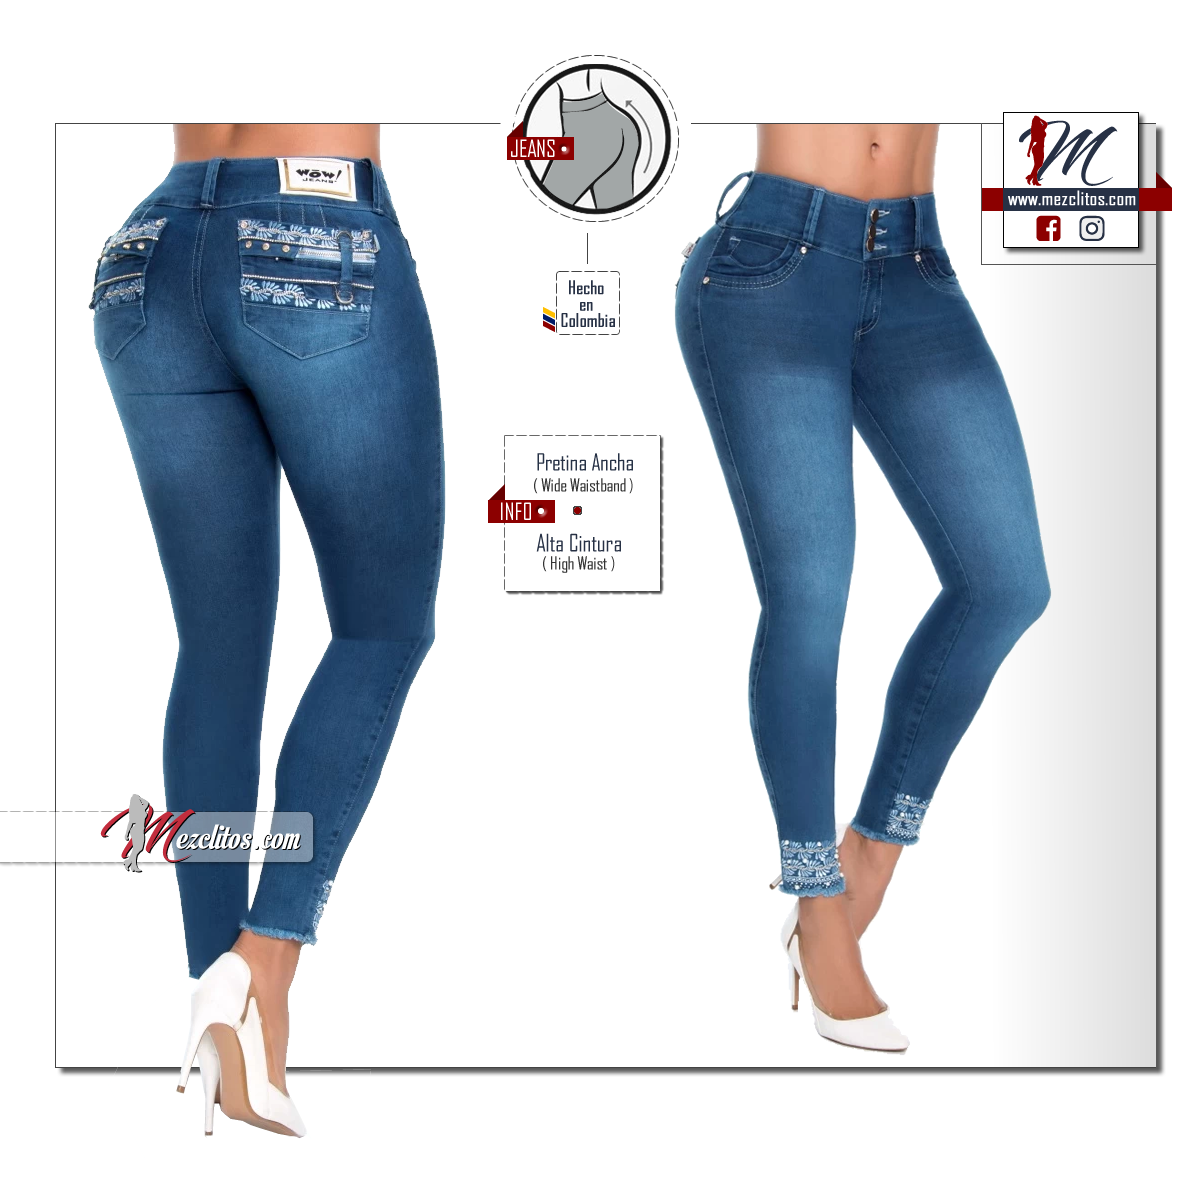 WOW Jeans 800208 - 100% Colombiano